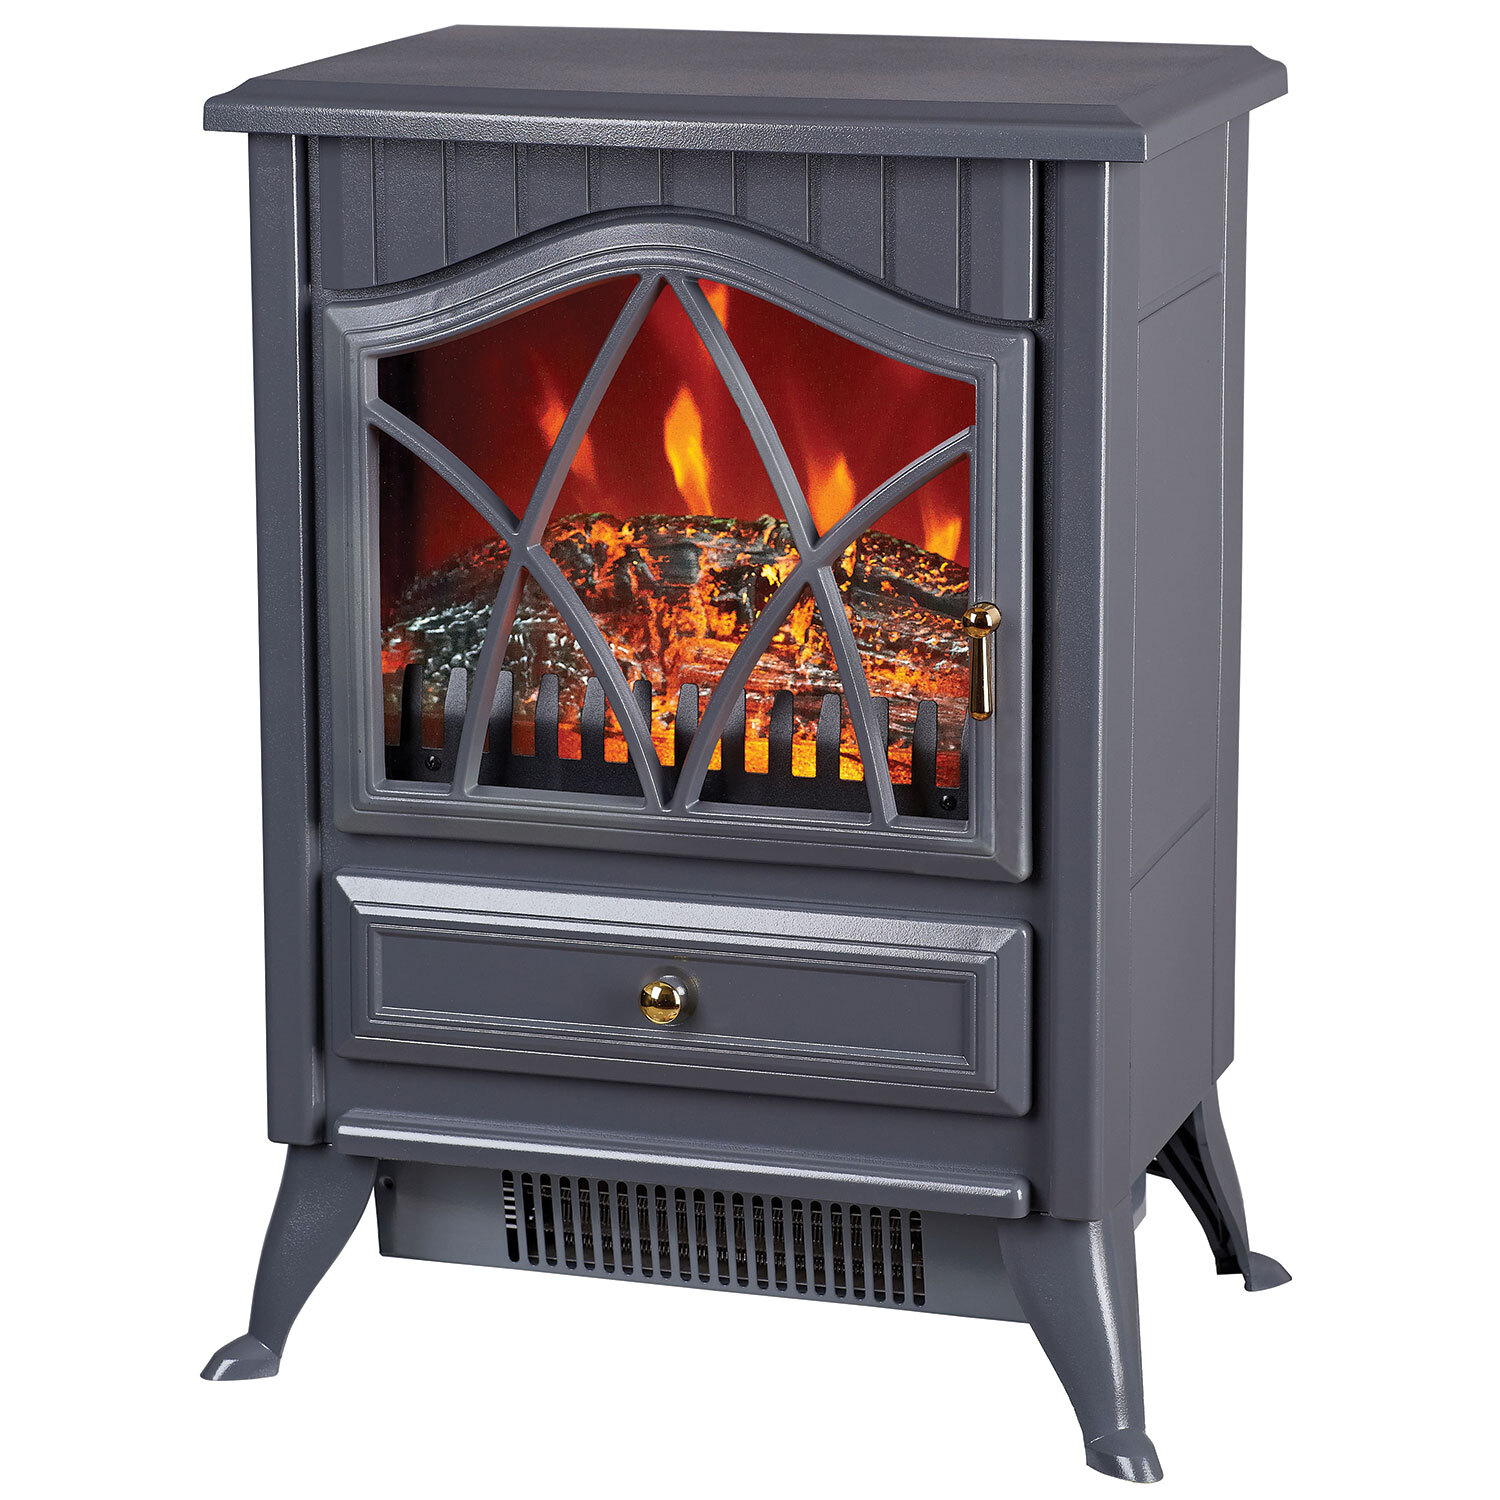 Grey Freestanding Log Effect Stove Fireplace Heaters Image 2